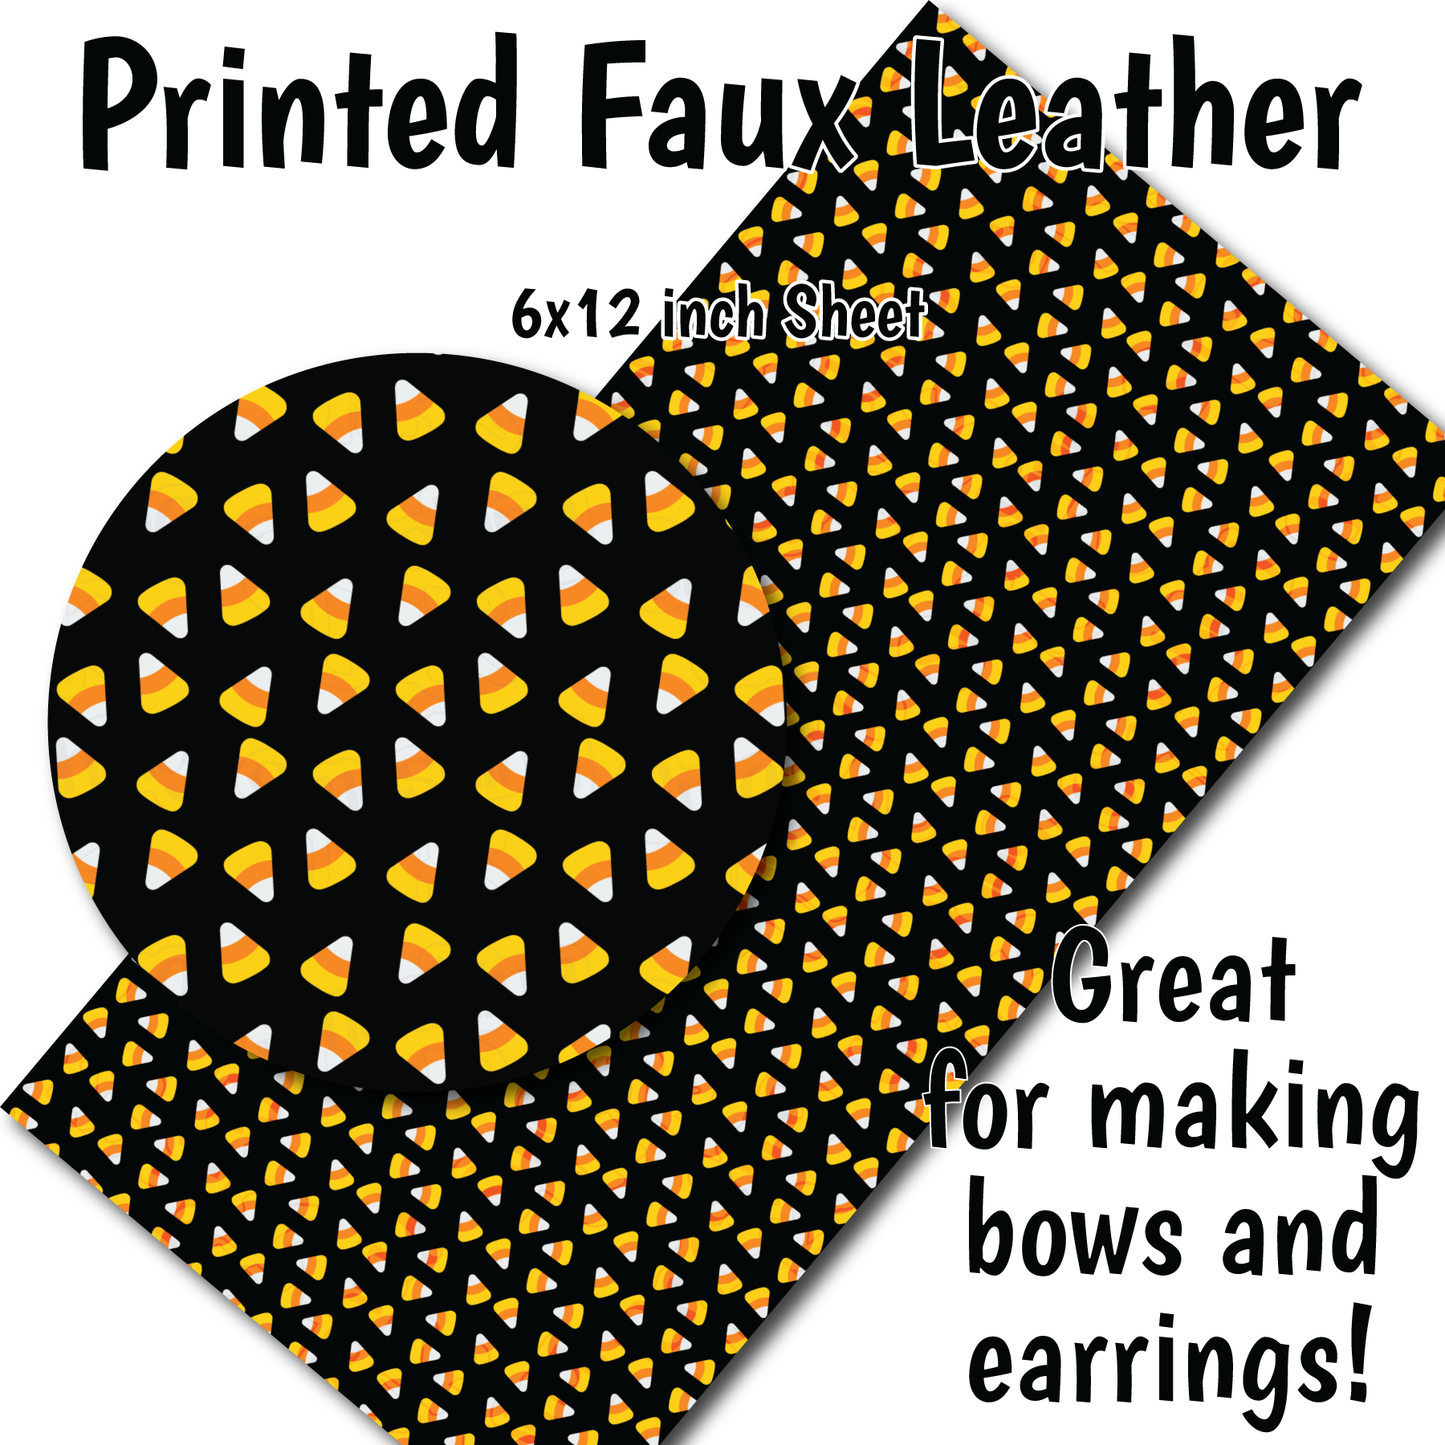 Candy Corn - Faux Leather Sheet (SHIPS IN 3 BUS DAYS)